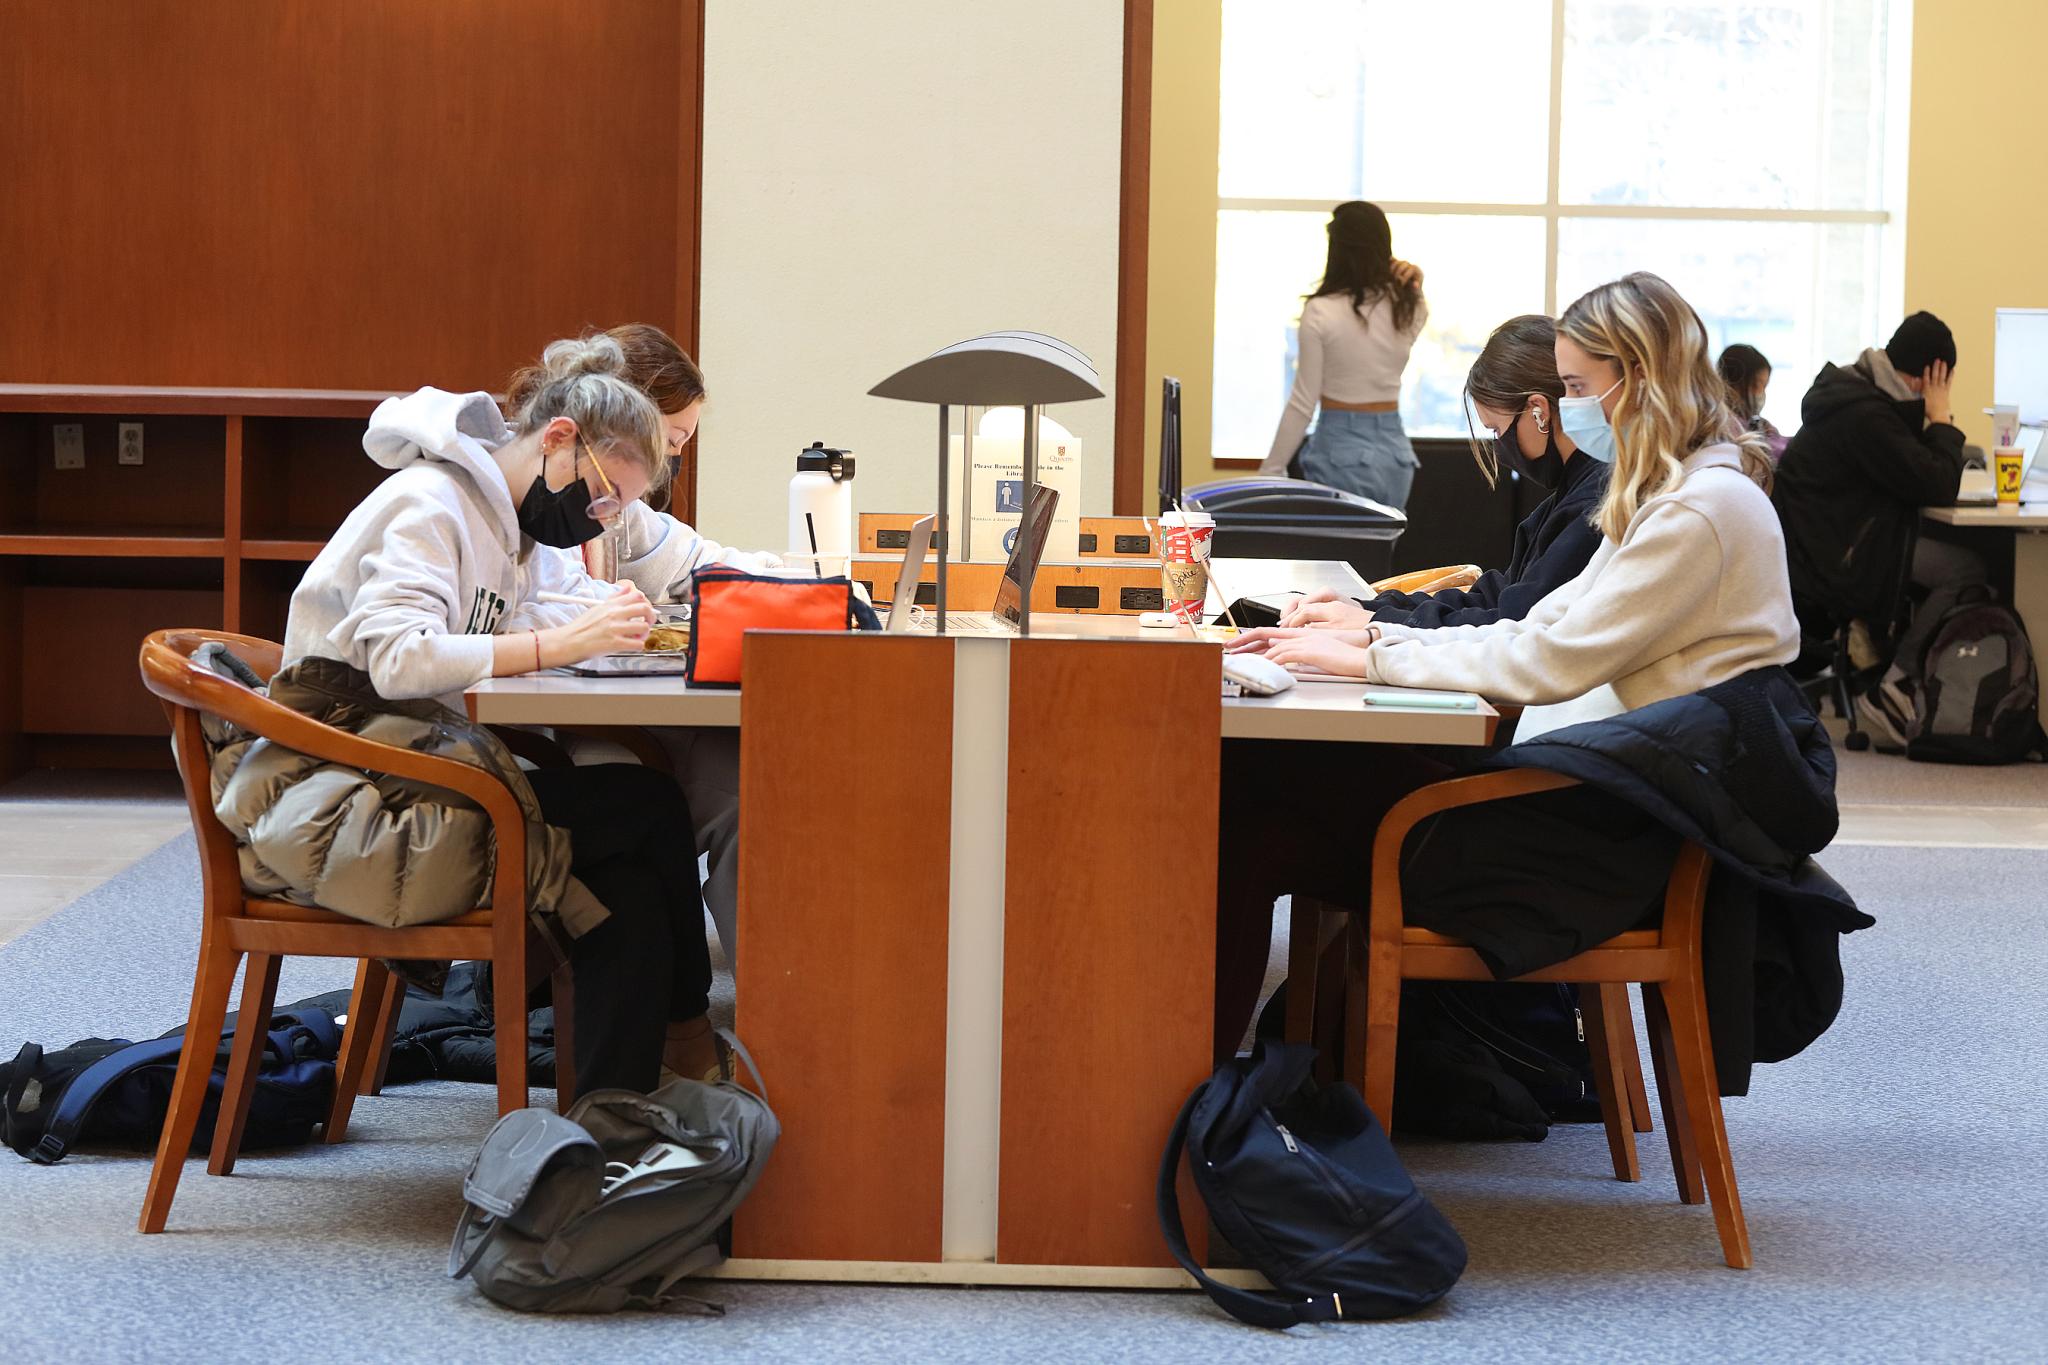 Group studying in the library